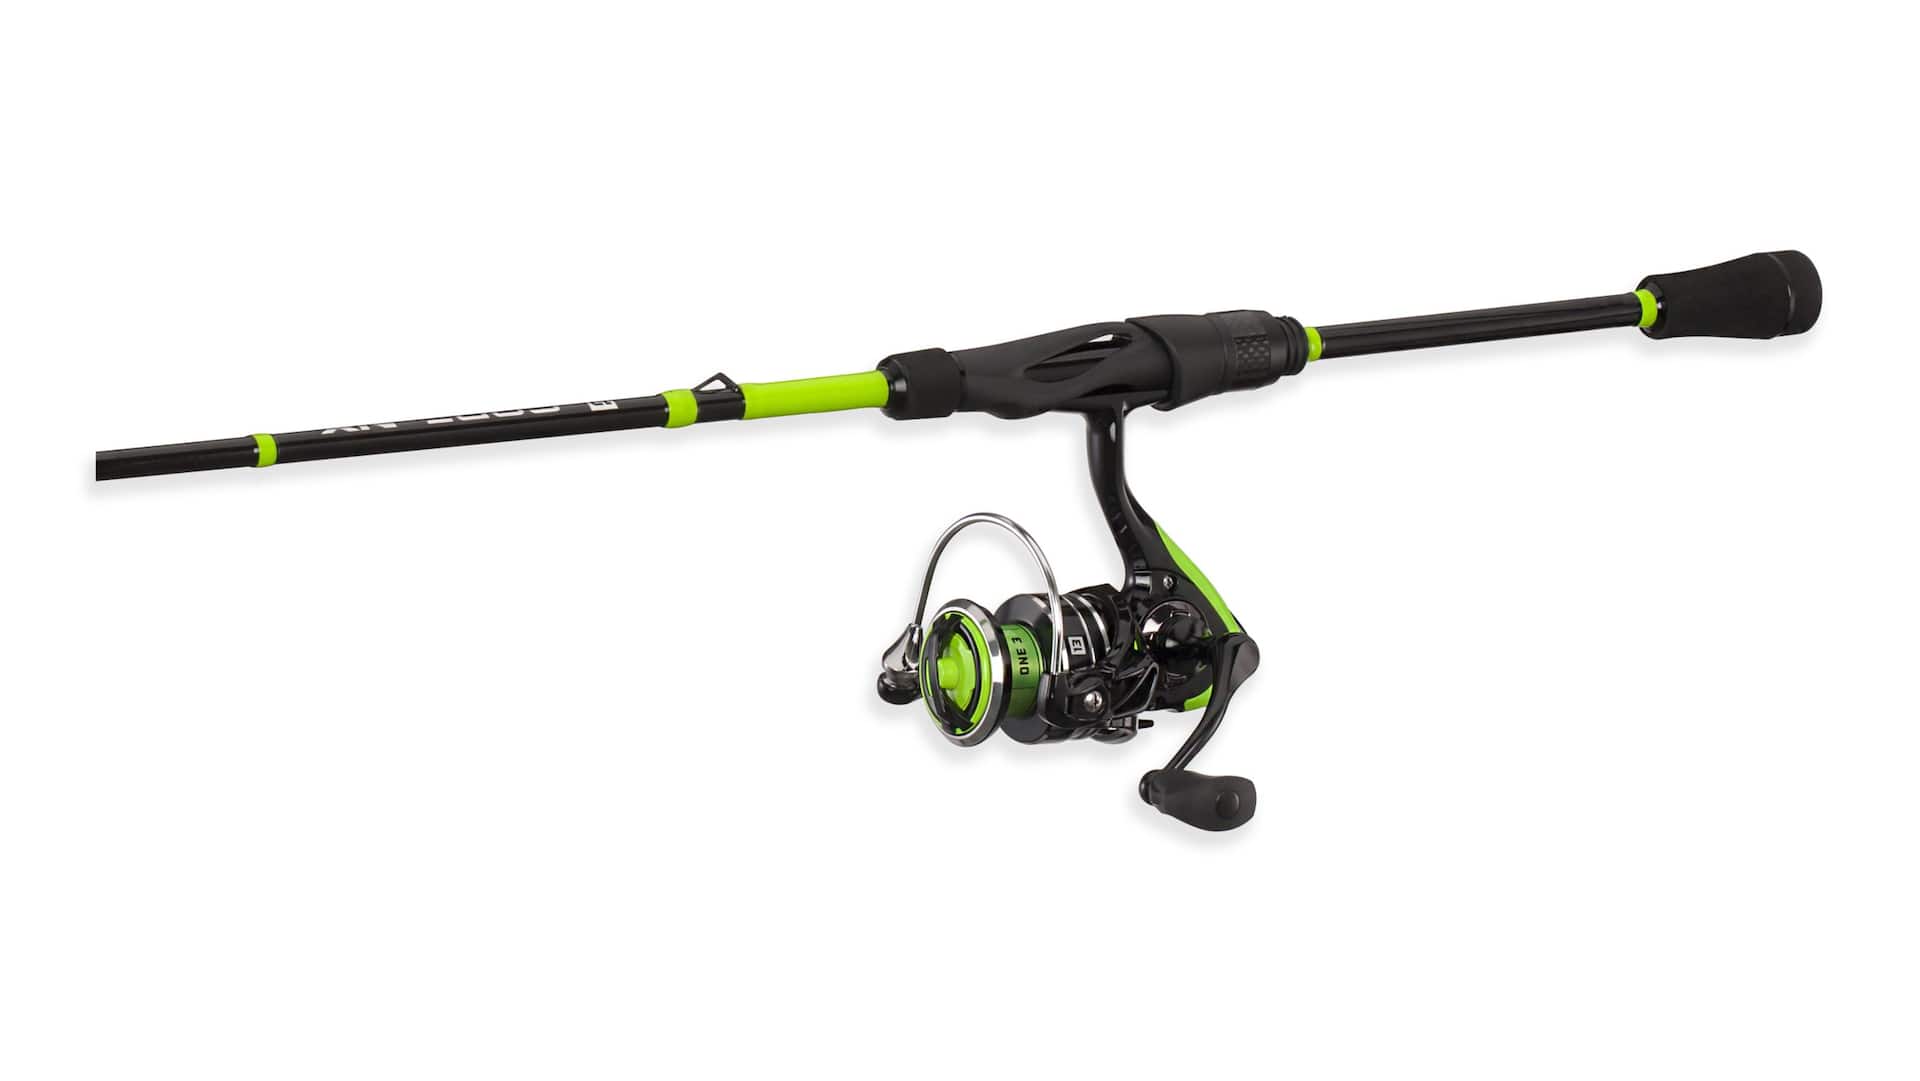 13 Fishing Code Spinning Reel and Rod Combo - Medium Power - 6-ft 6-in - Black